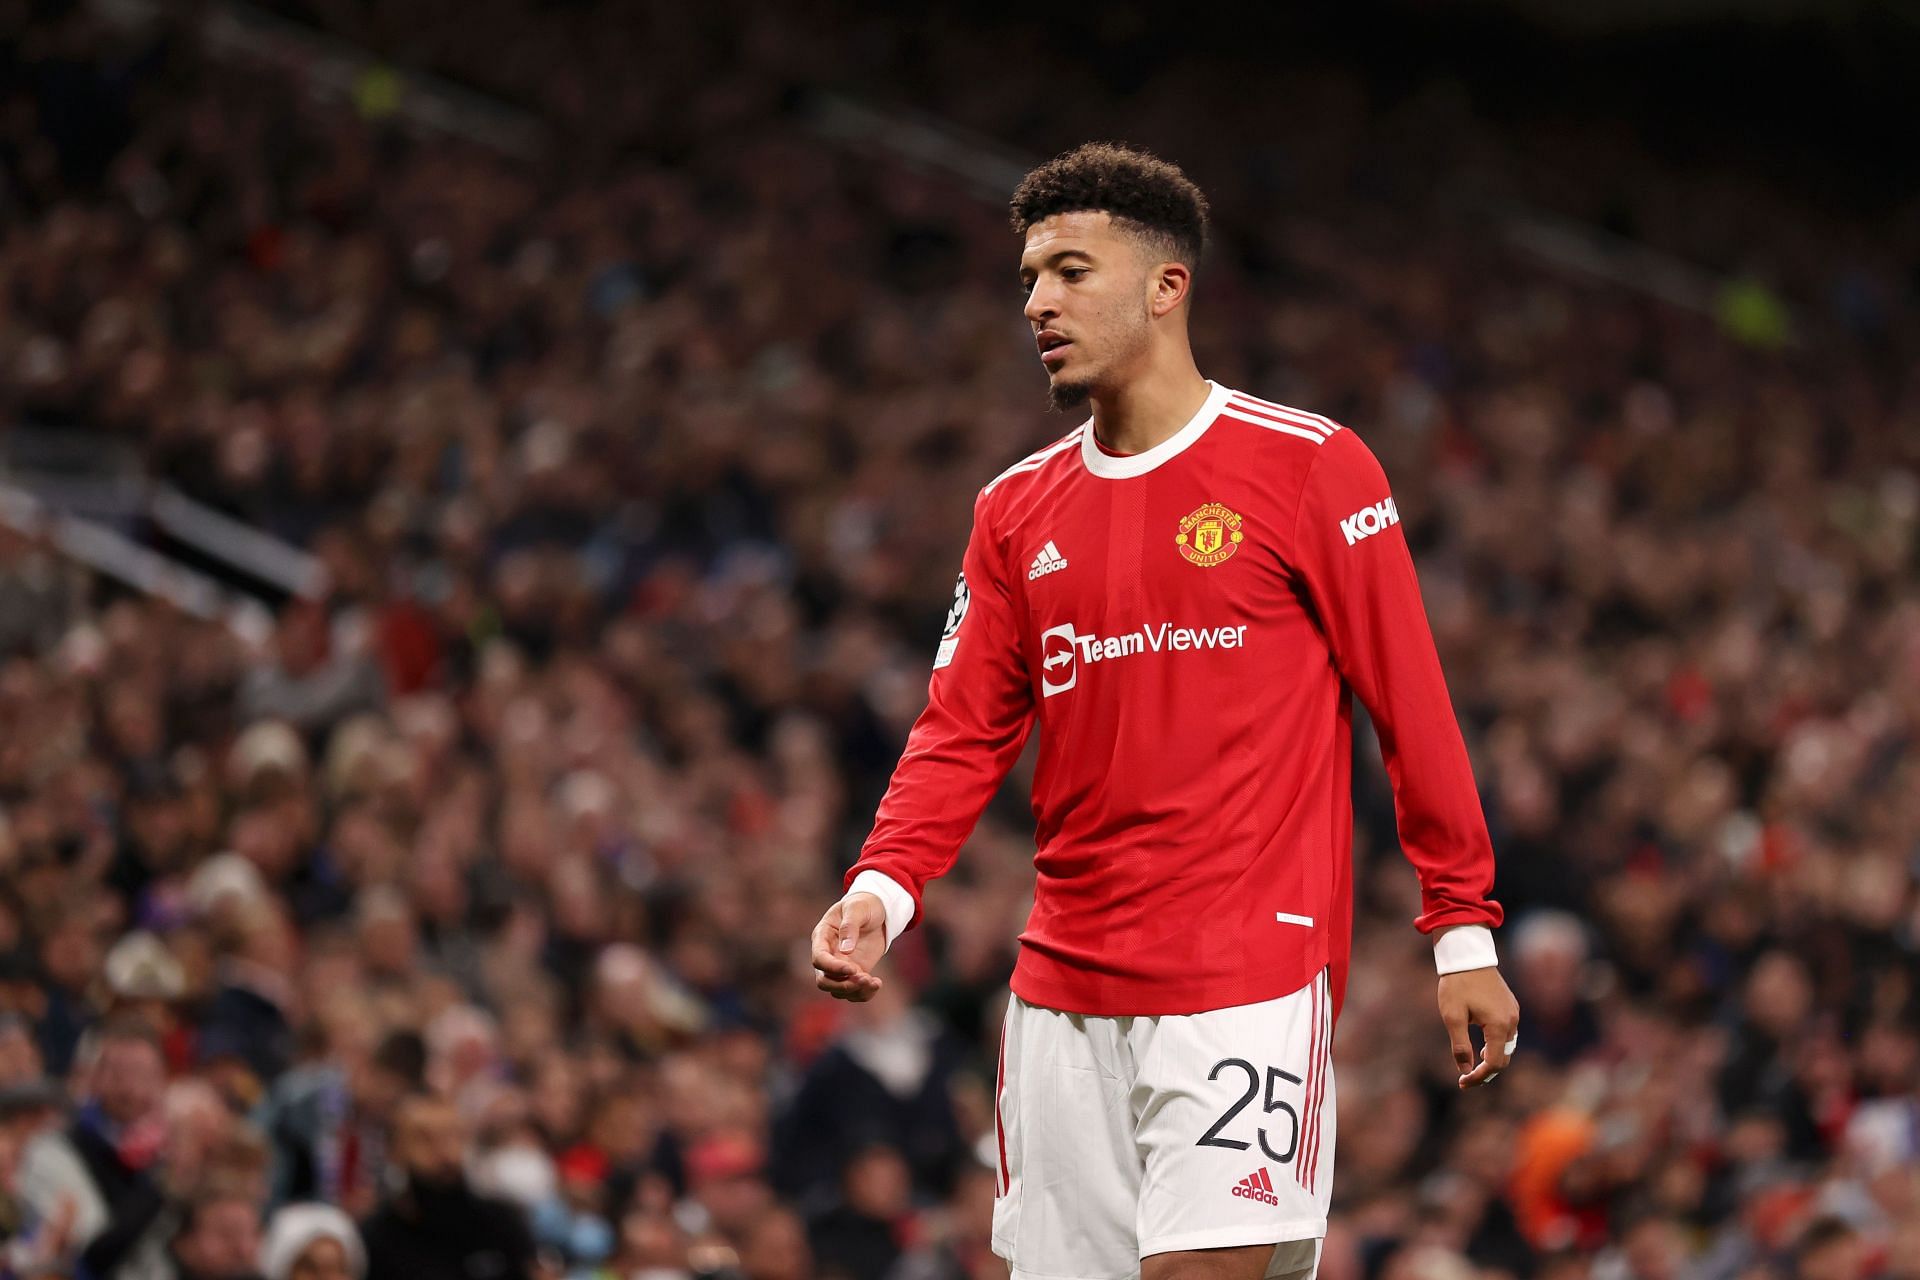 Rio Ferdinand believes Jadon Sancho will be successful at Manchester United.